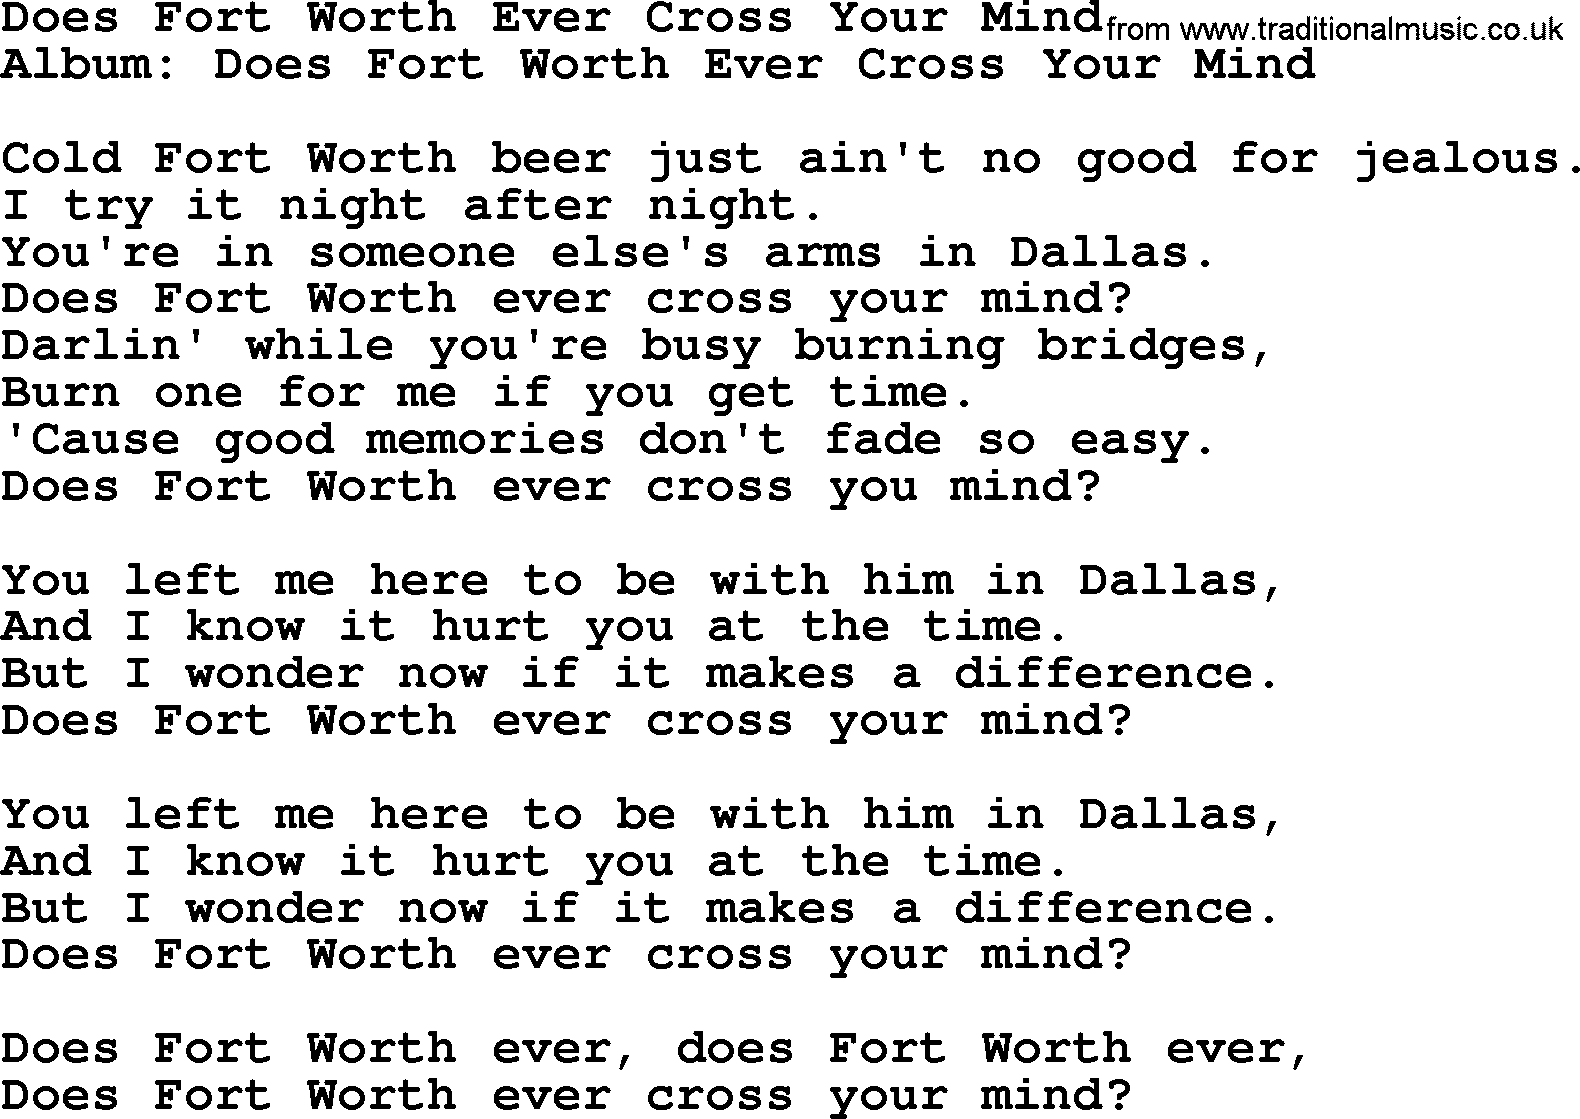 Does Fort Worth Ever Cross Your Mind By George Strait Lyrics